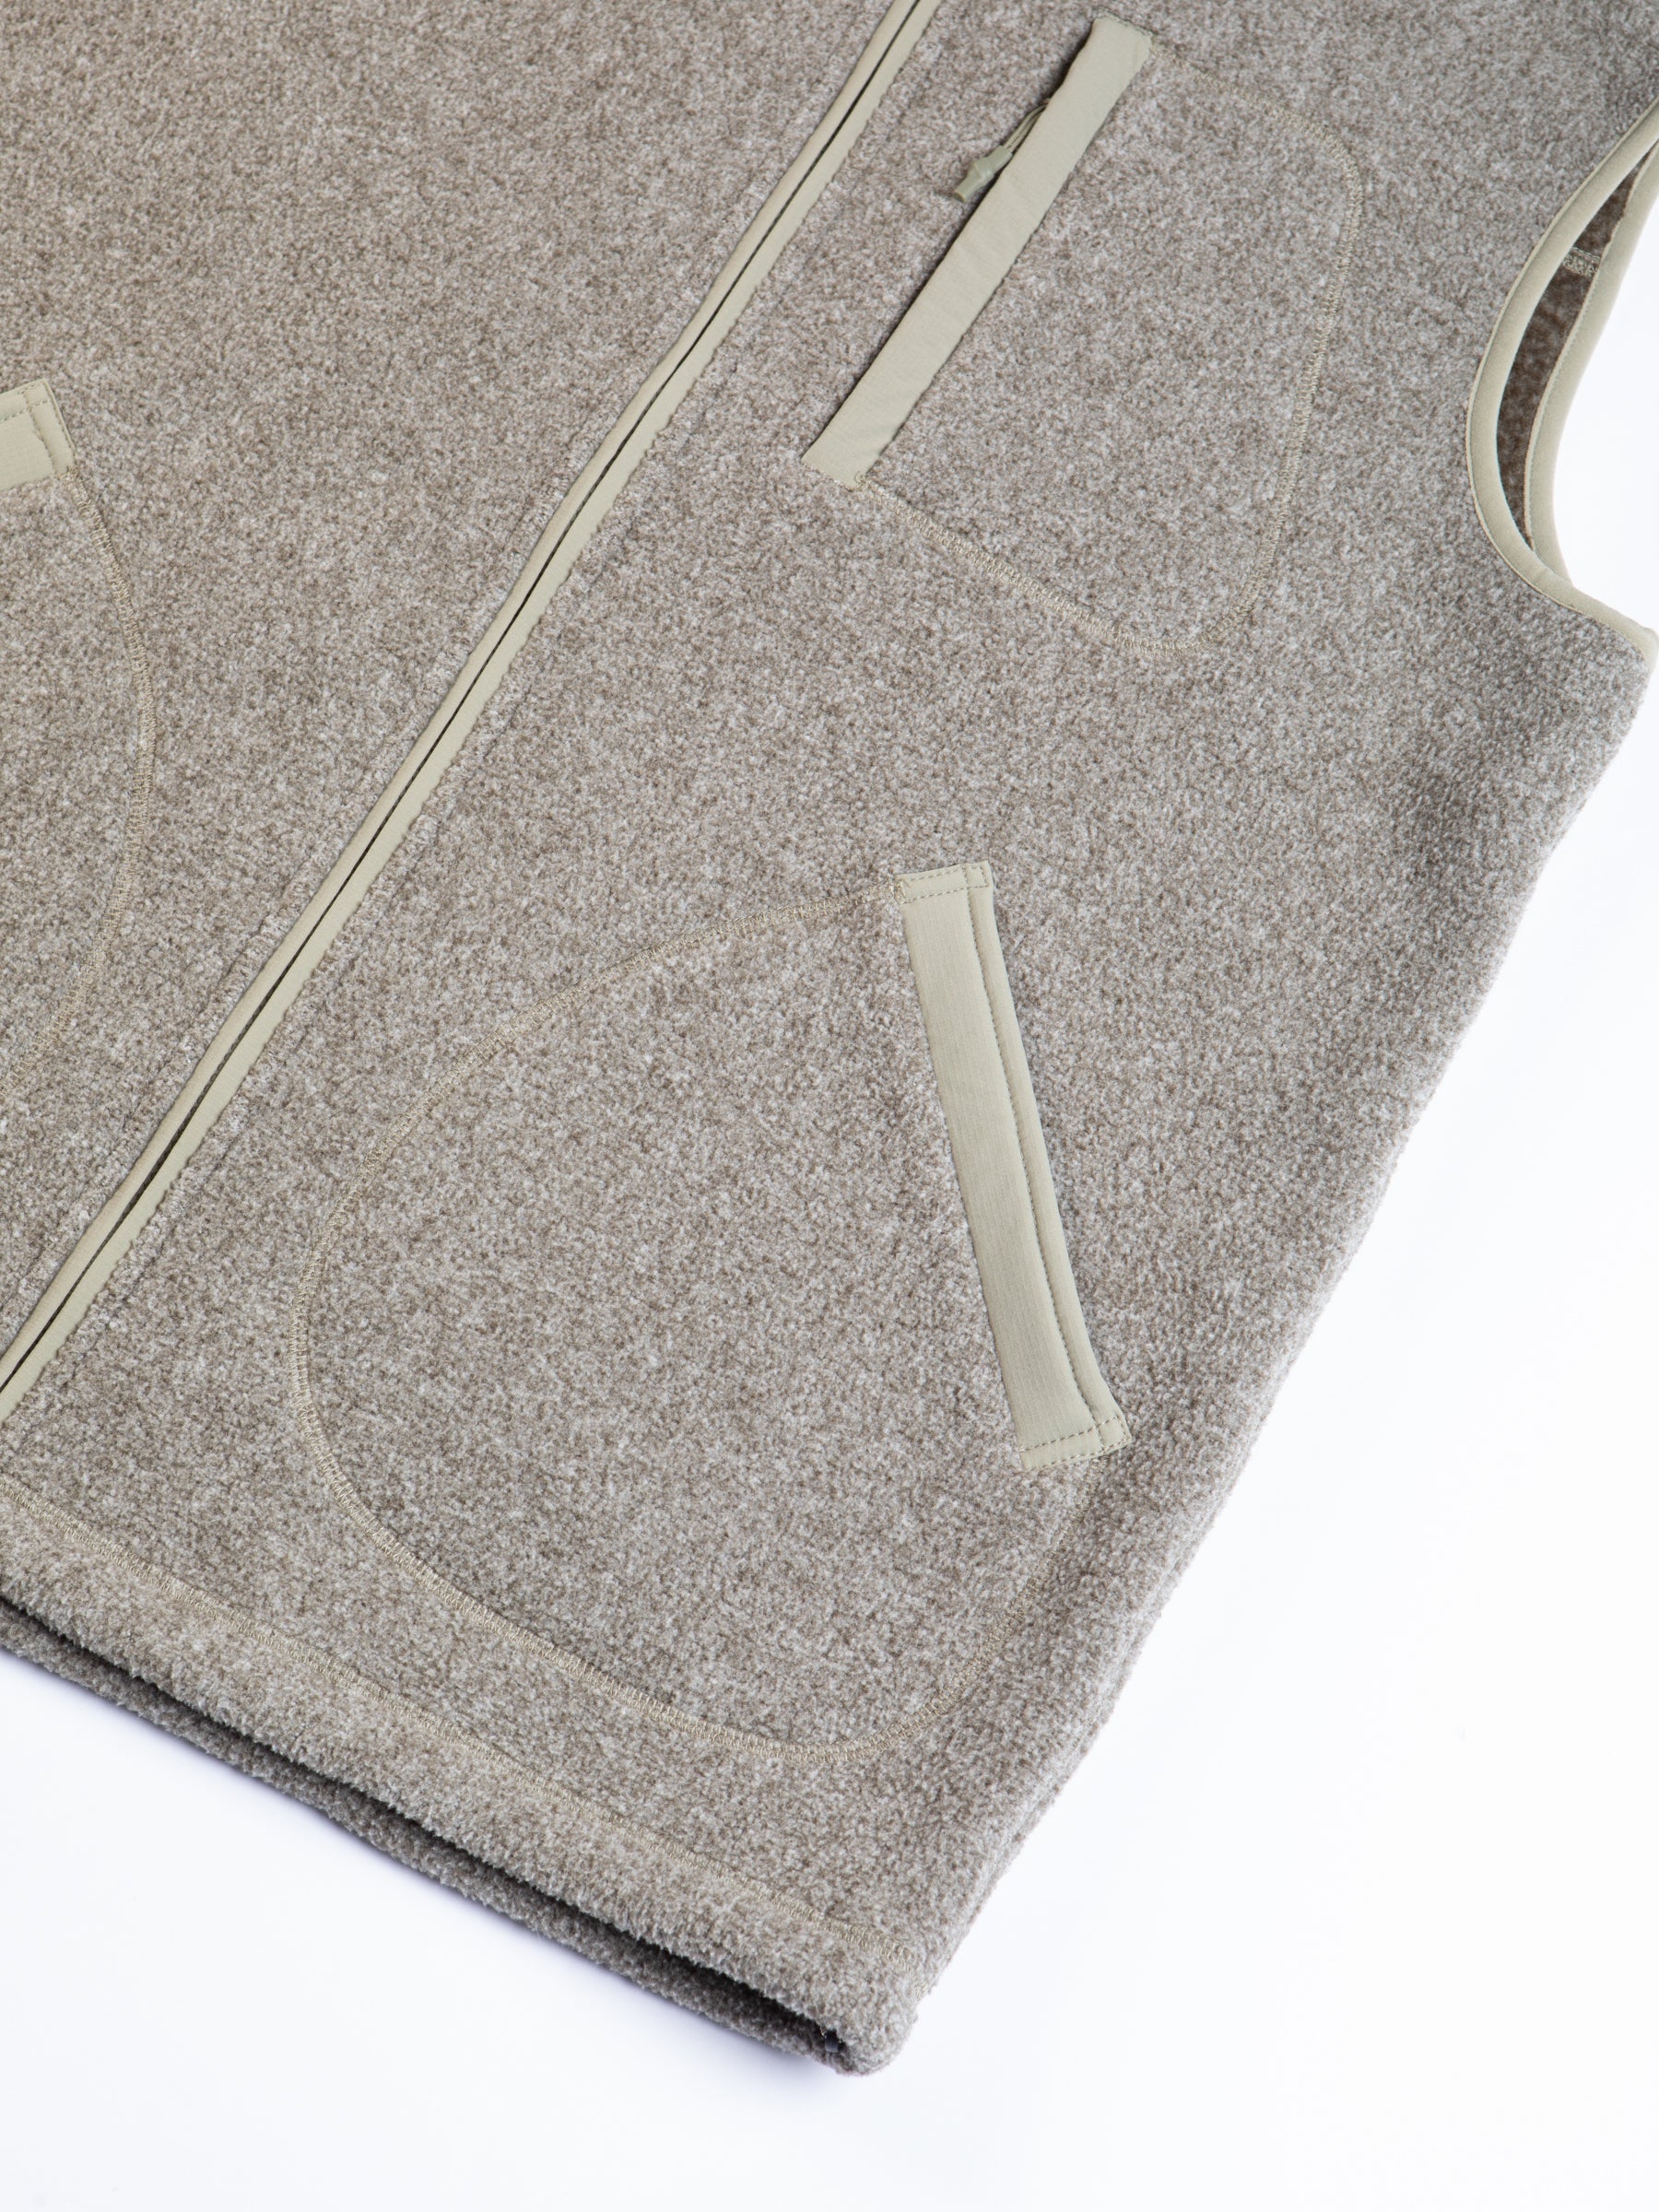 A green marled fleece material used to make a men's fleece vest, on a white background.